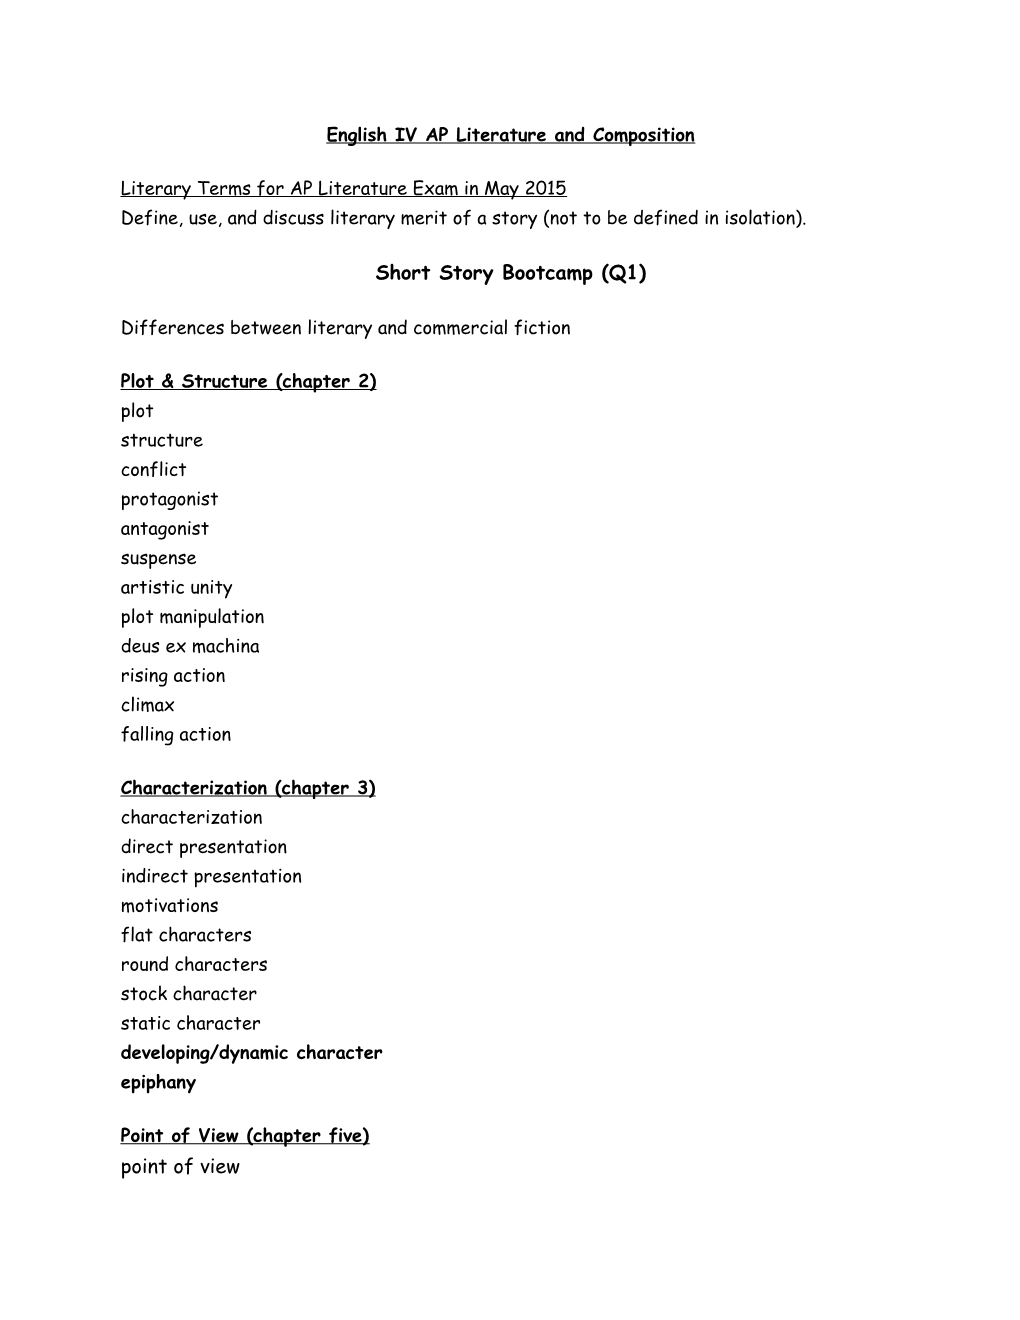 English IV AP Literary Terms And Authors 2014.Docx